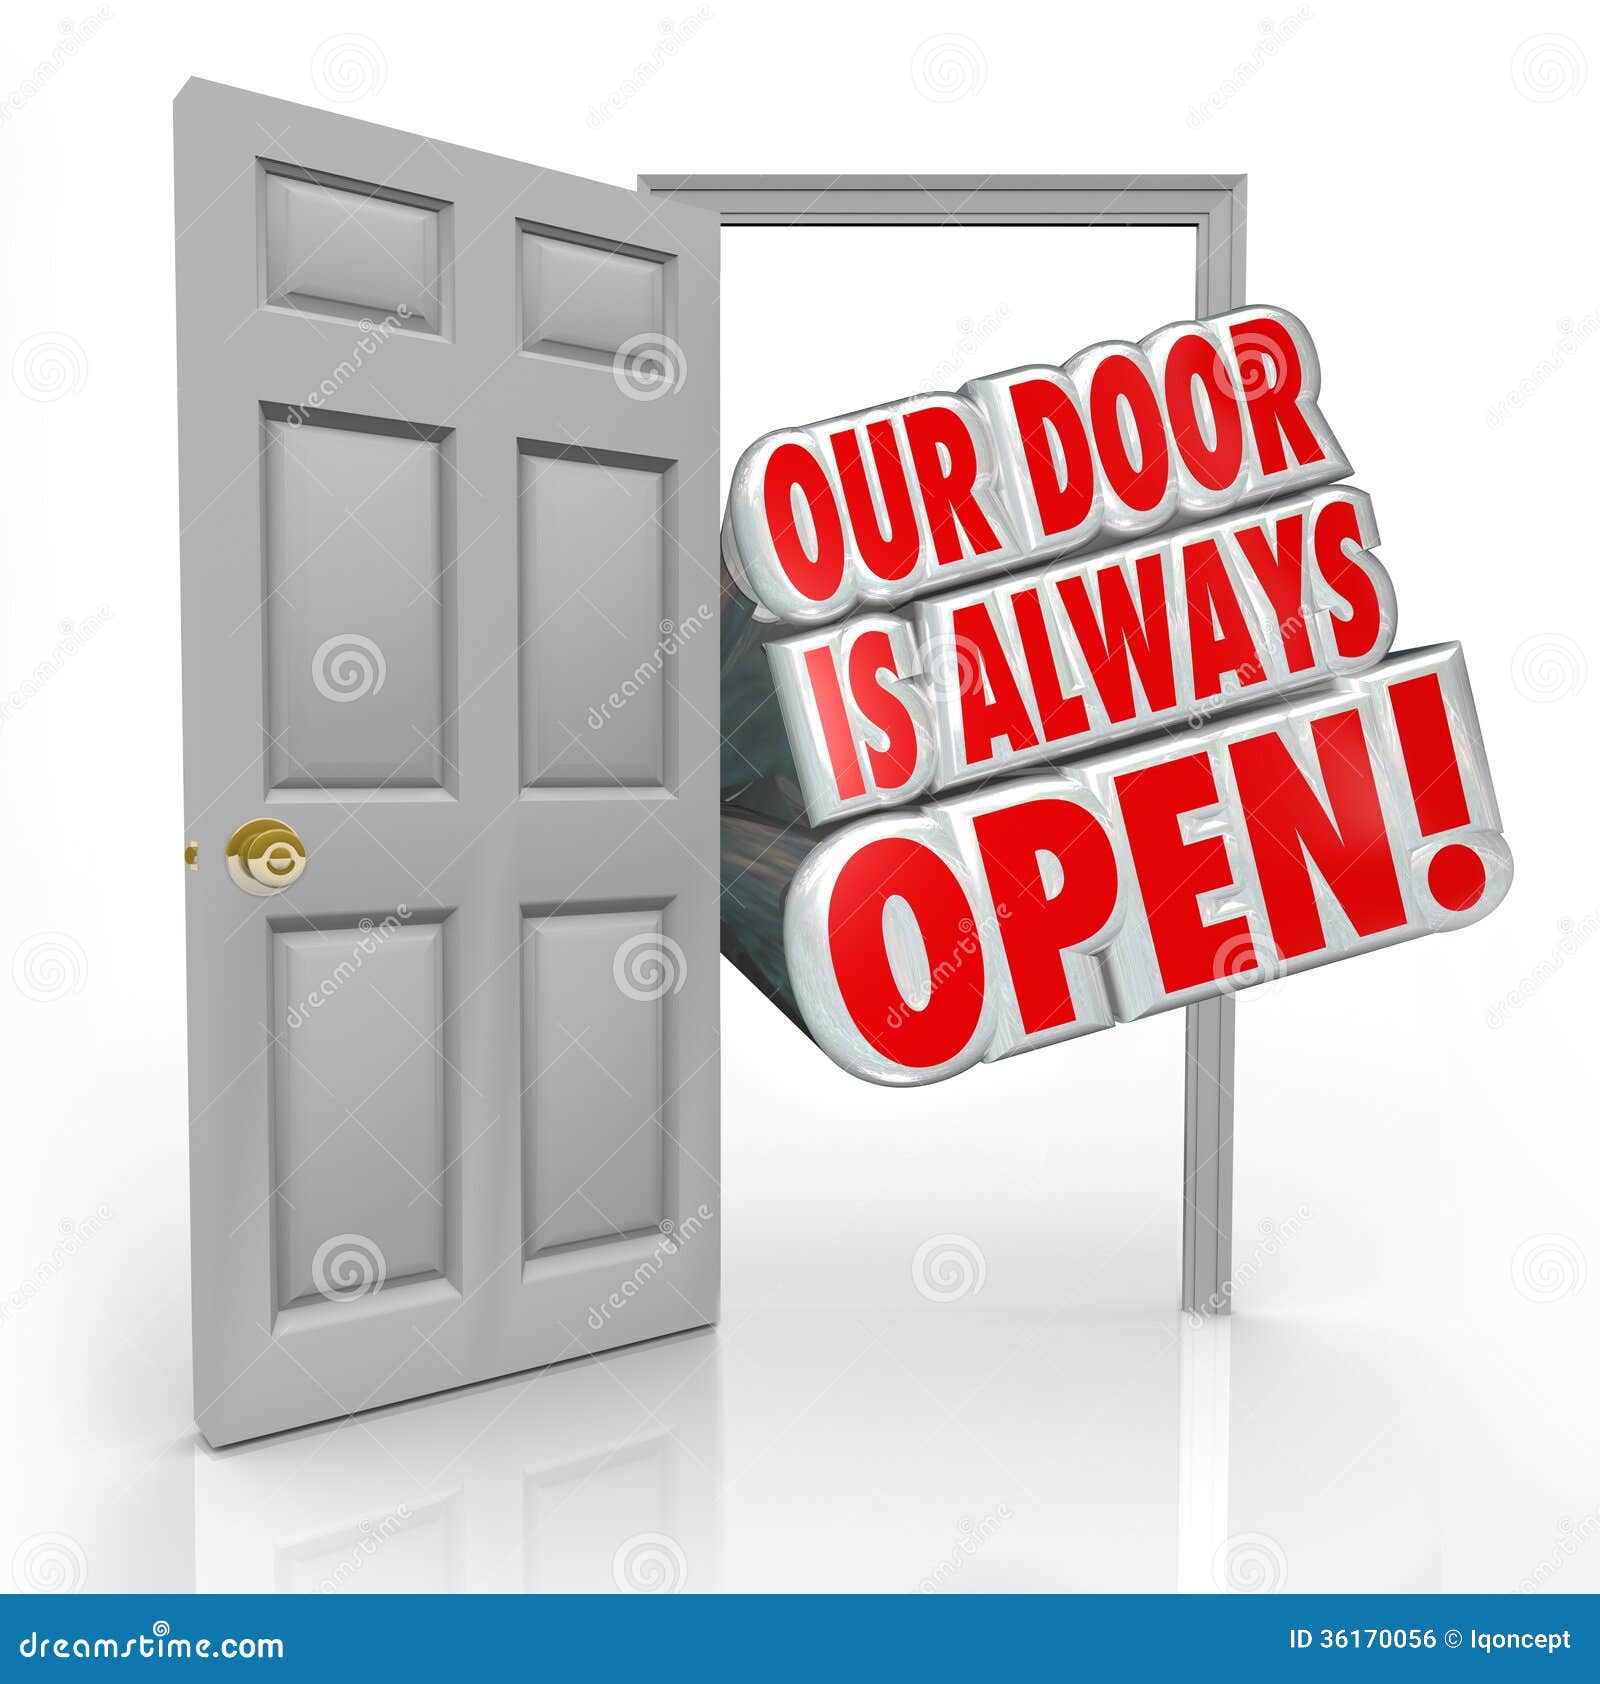 our-door-open-invitation-welcome-inside-words-coming-out-to-invite-you-office-store-36170056.jpg